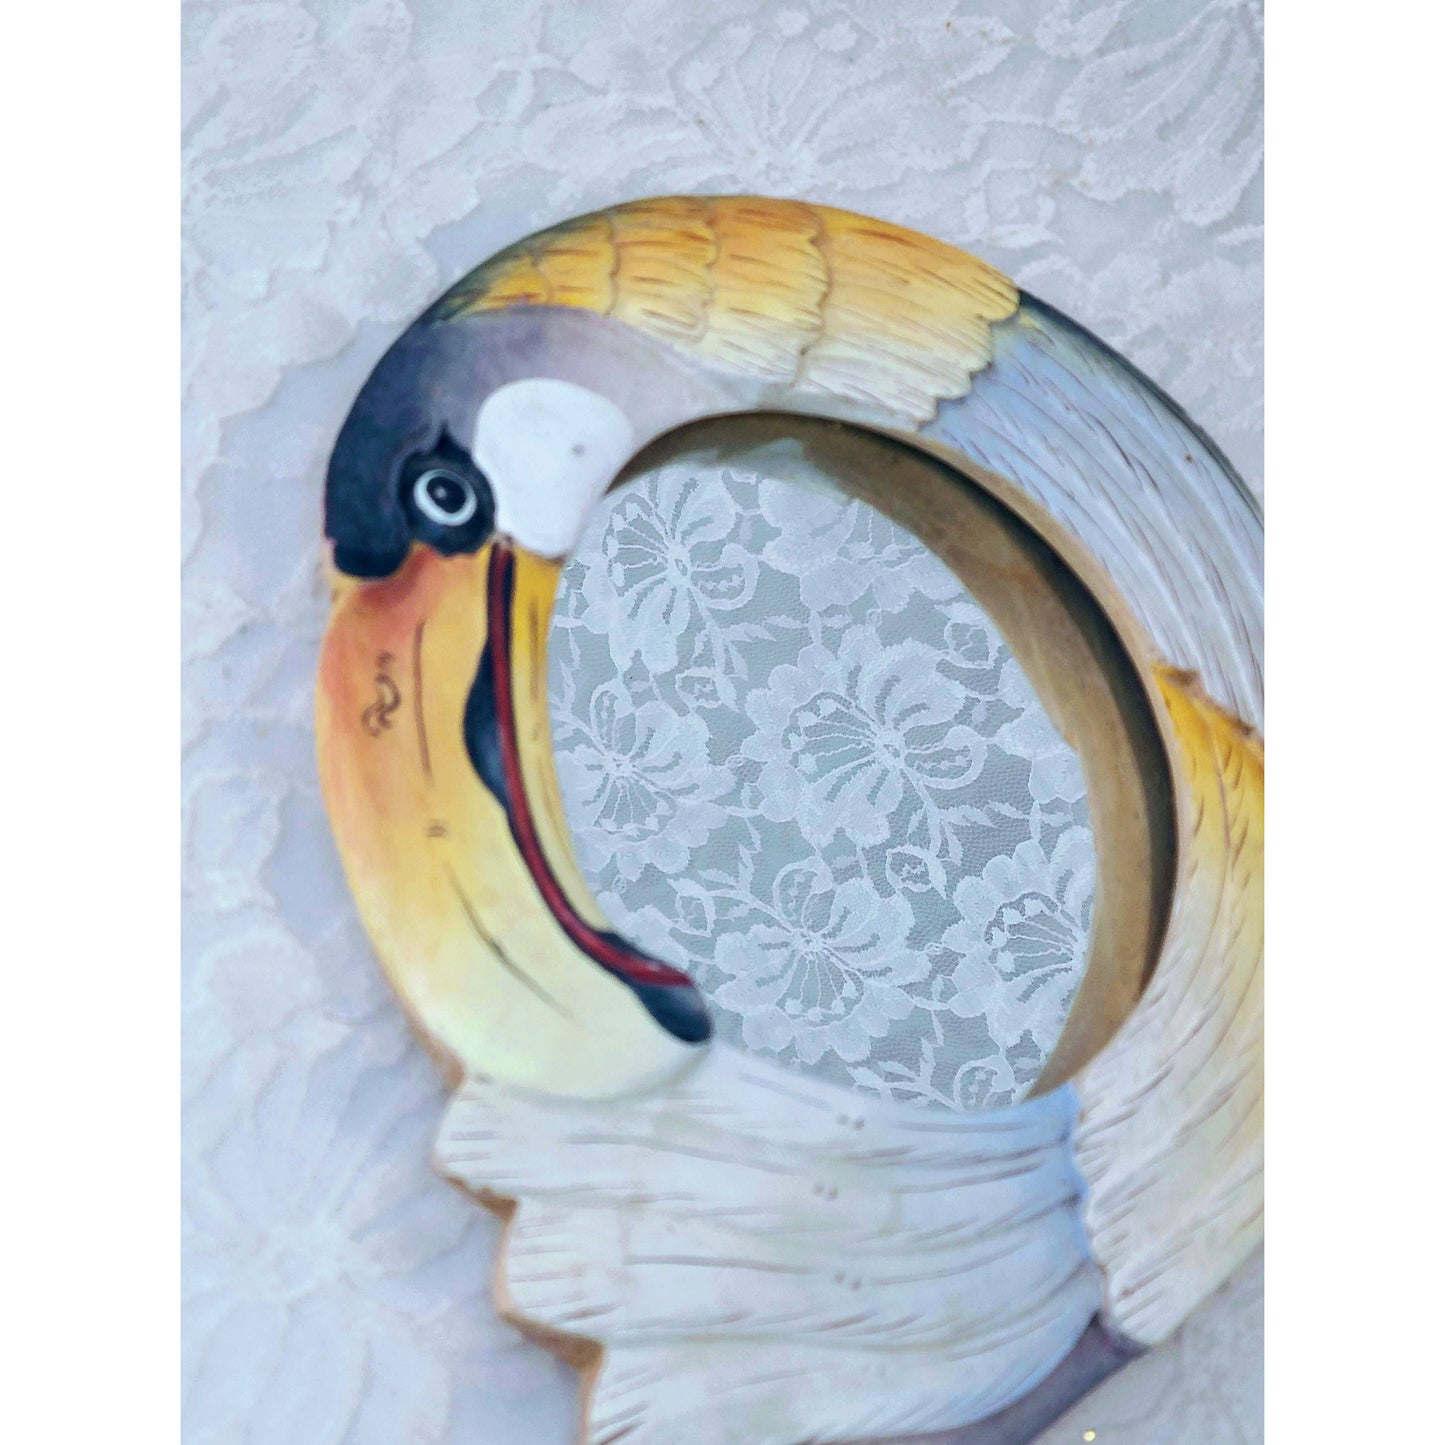 Hand Painted Wooden Hand Mirror ~Made in Bali, Indonesia ~ Beautiful Vanity Decor ~ Tropical ~ Bird